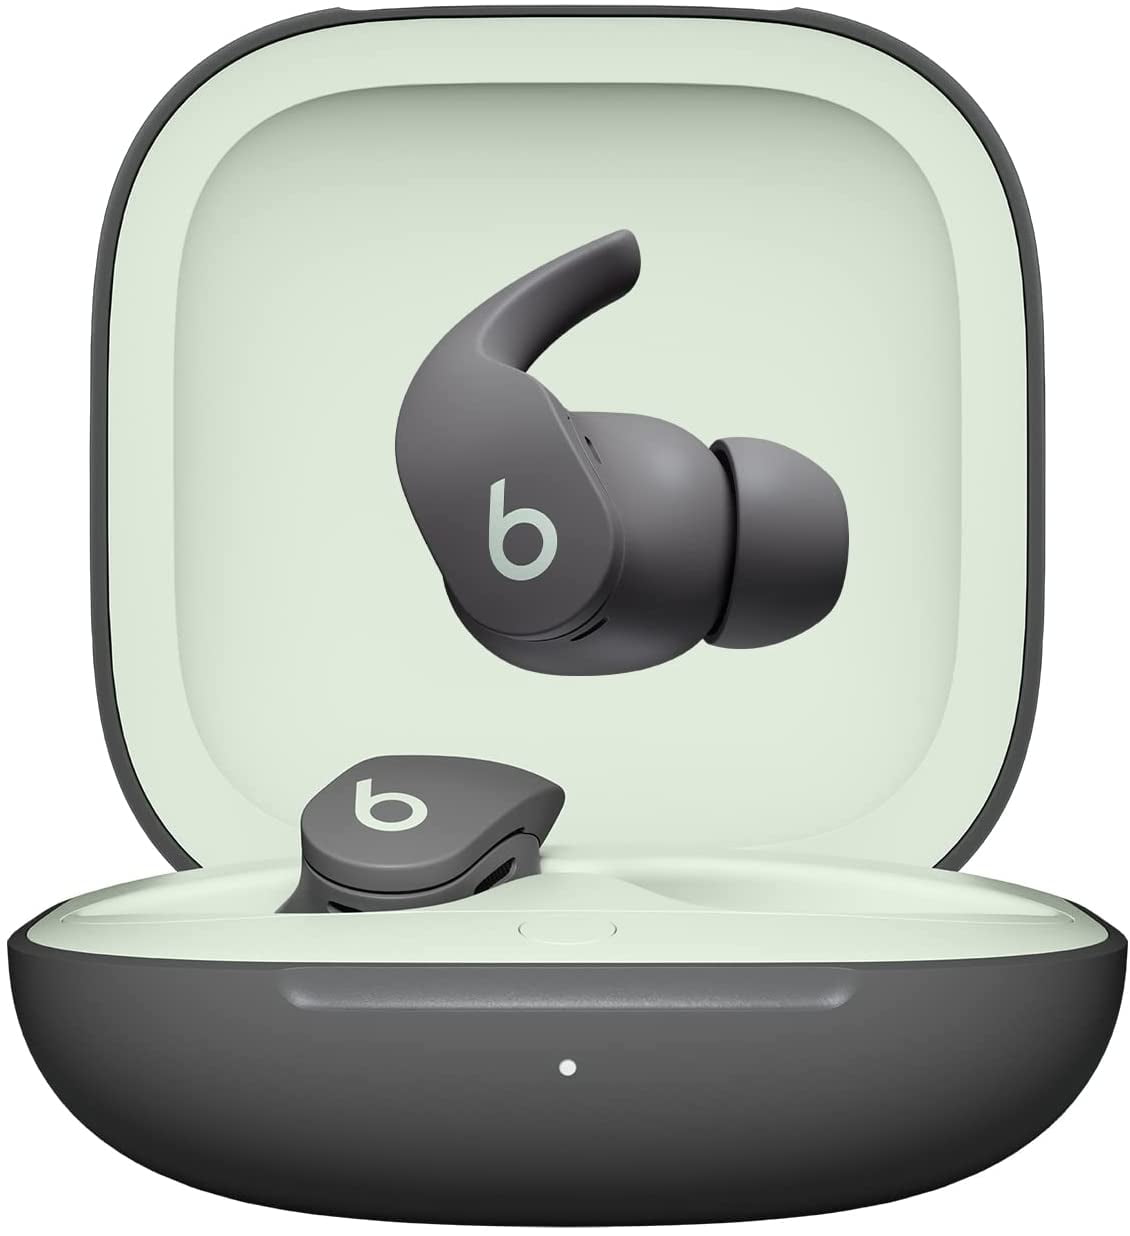 Restored Beats Pro True Wireless Noise Cancelling Earbuds - H1 Chip, Class 1 Bluetooth, 6 Hours of Listening Time, Sweat Resistant, Built-In Microphone (Sage Gray) - Walmart.com